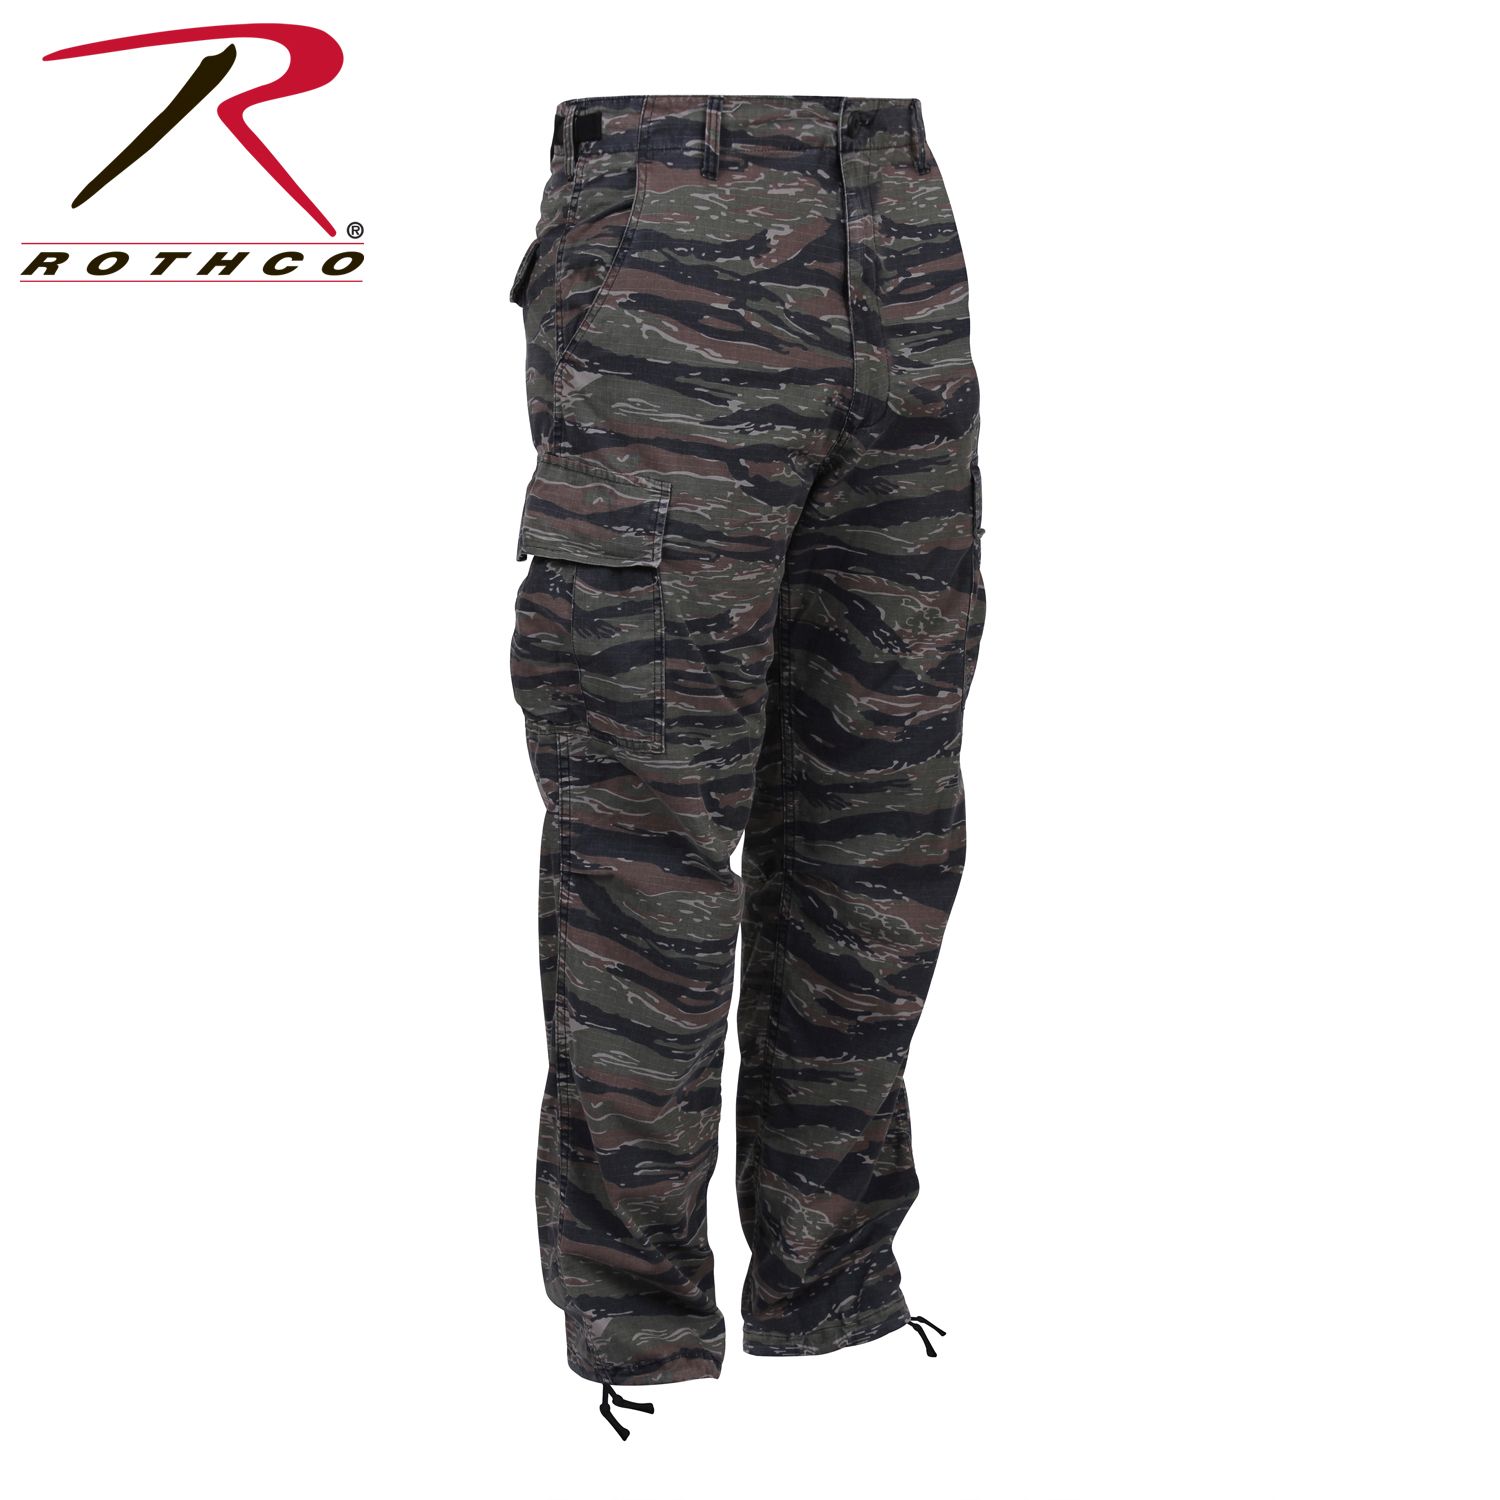 Buy Rothco Camo Tactical BDU Pants - Rothco Online at Best price - AZ